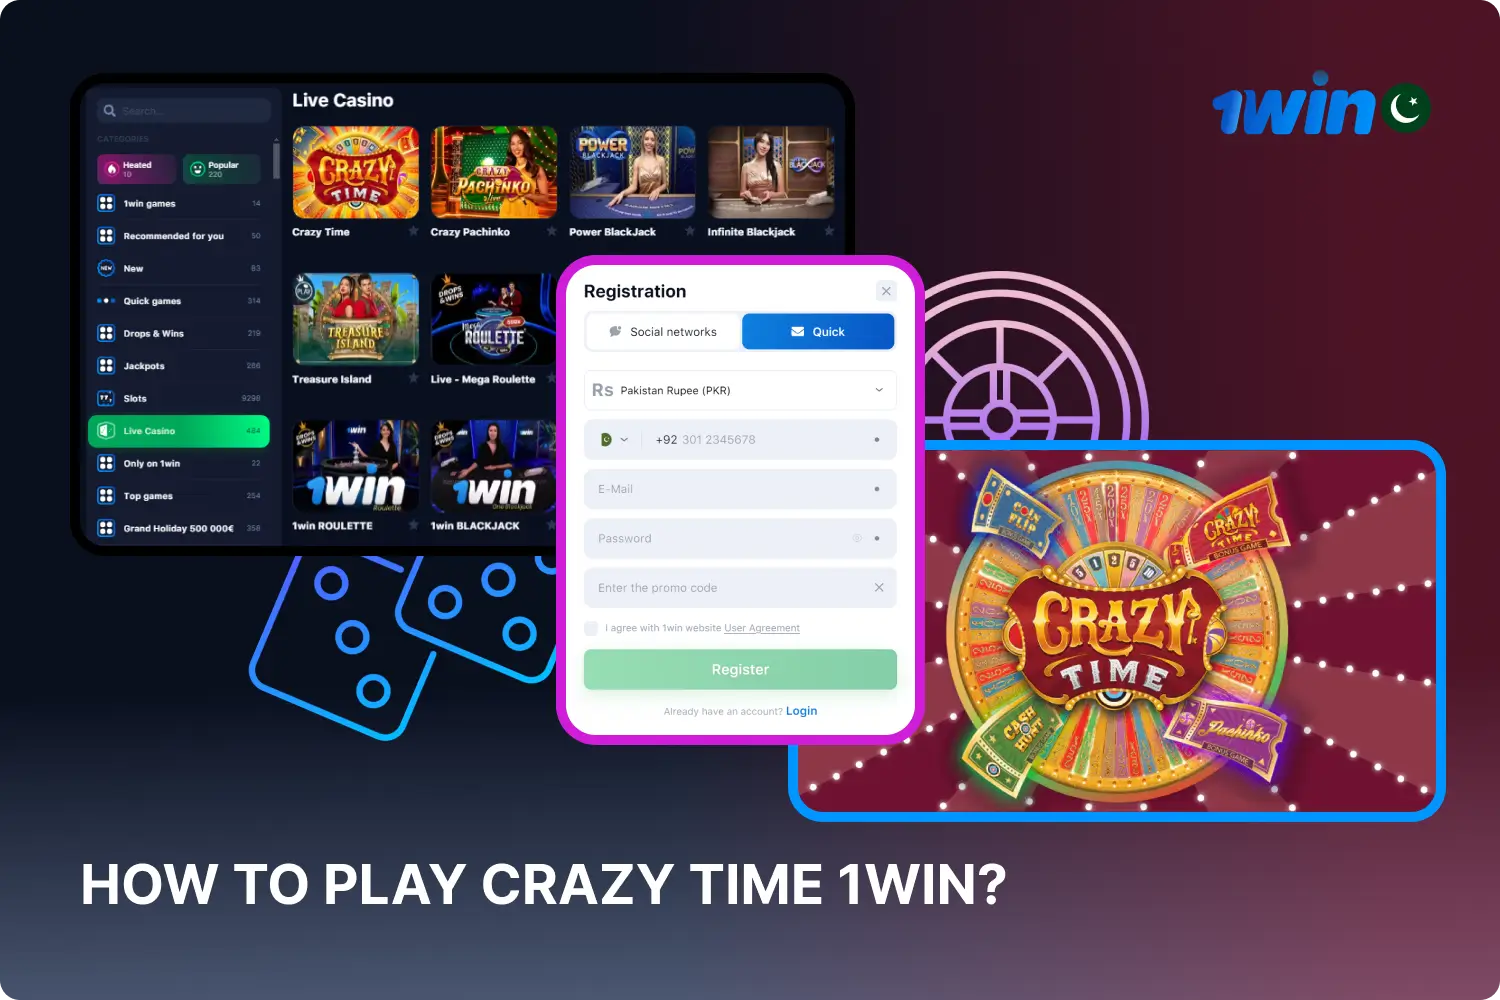 To start playing Crazy Time at 1win in Pakistan, players need to register on the site, fund their account, enter the game and enter the bet amount